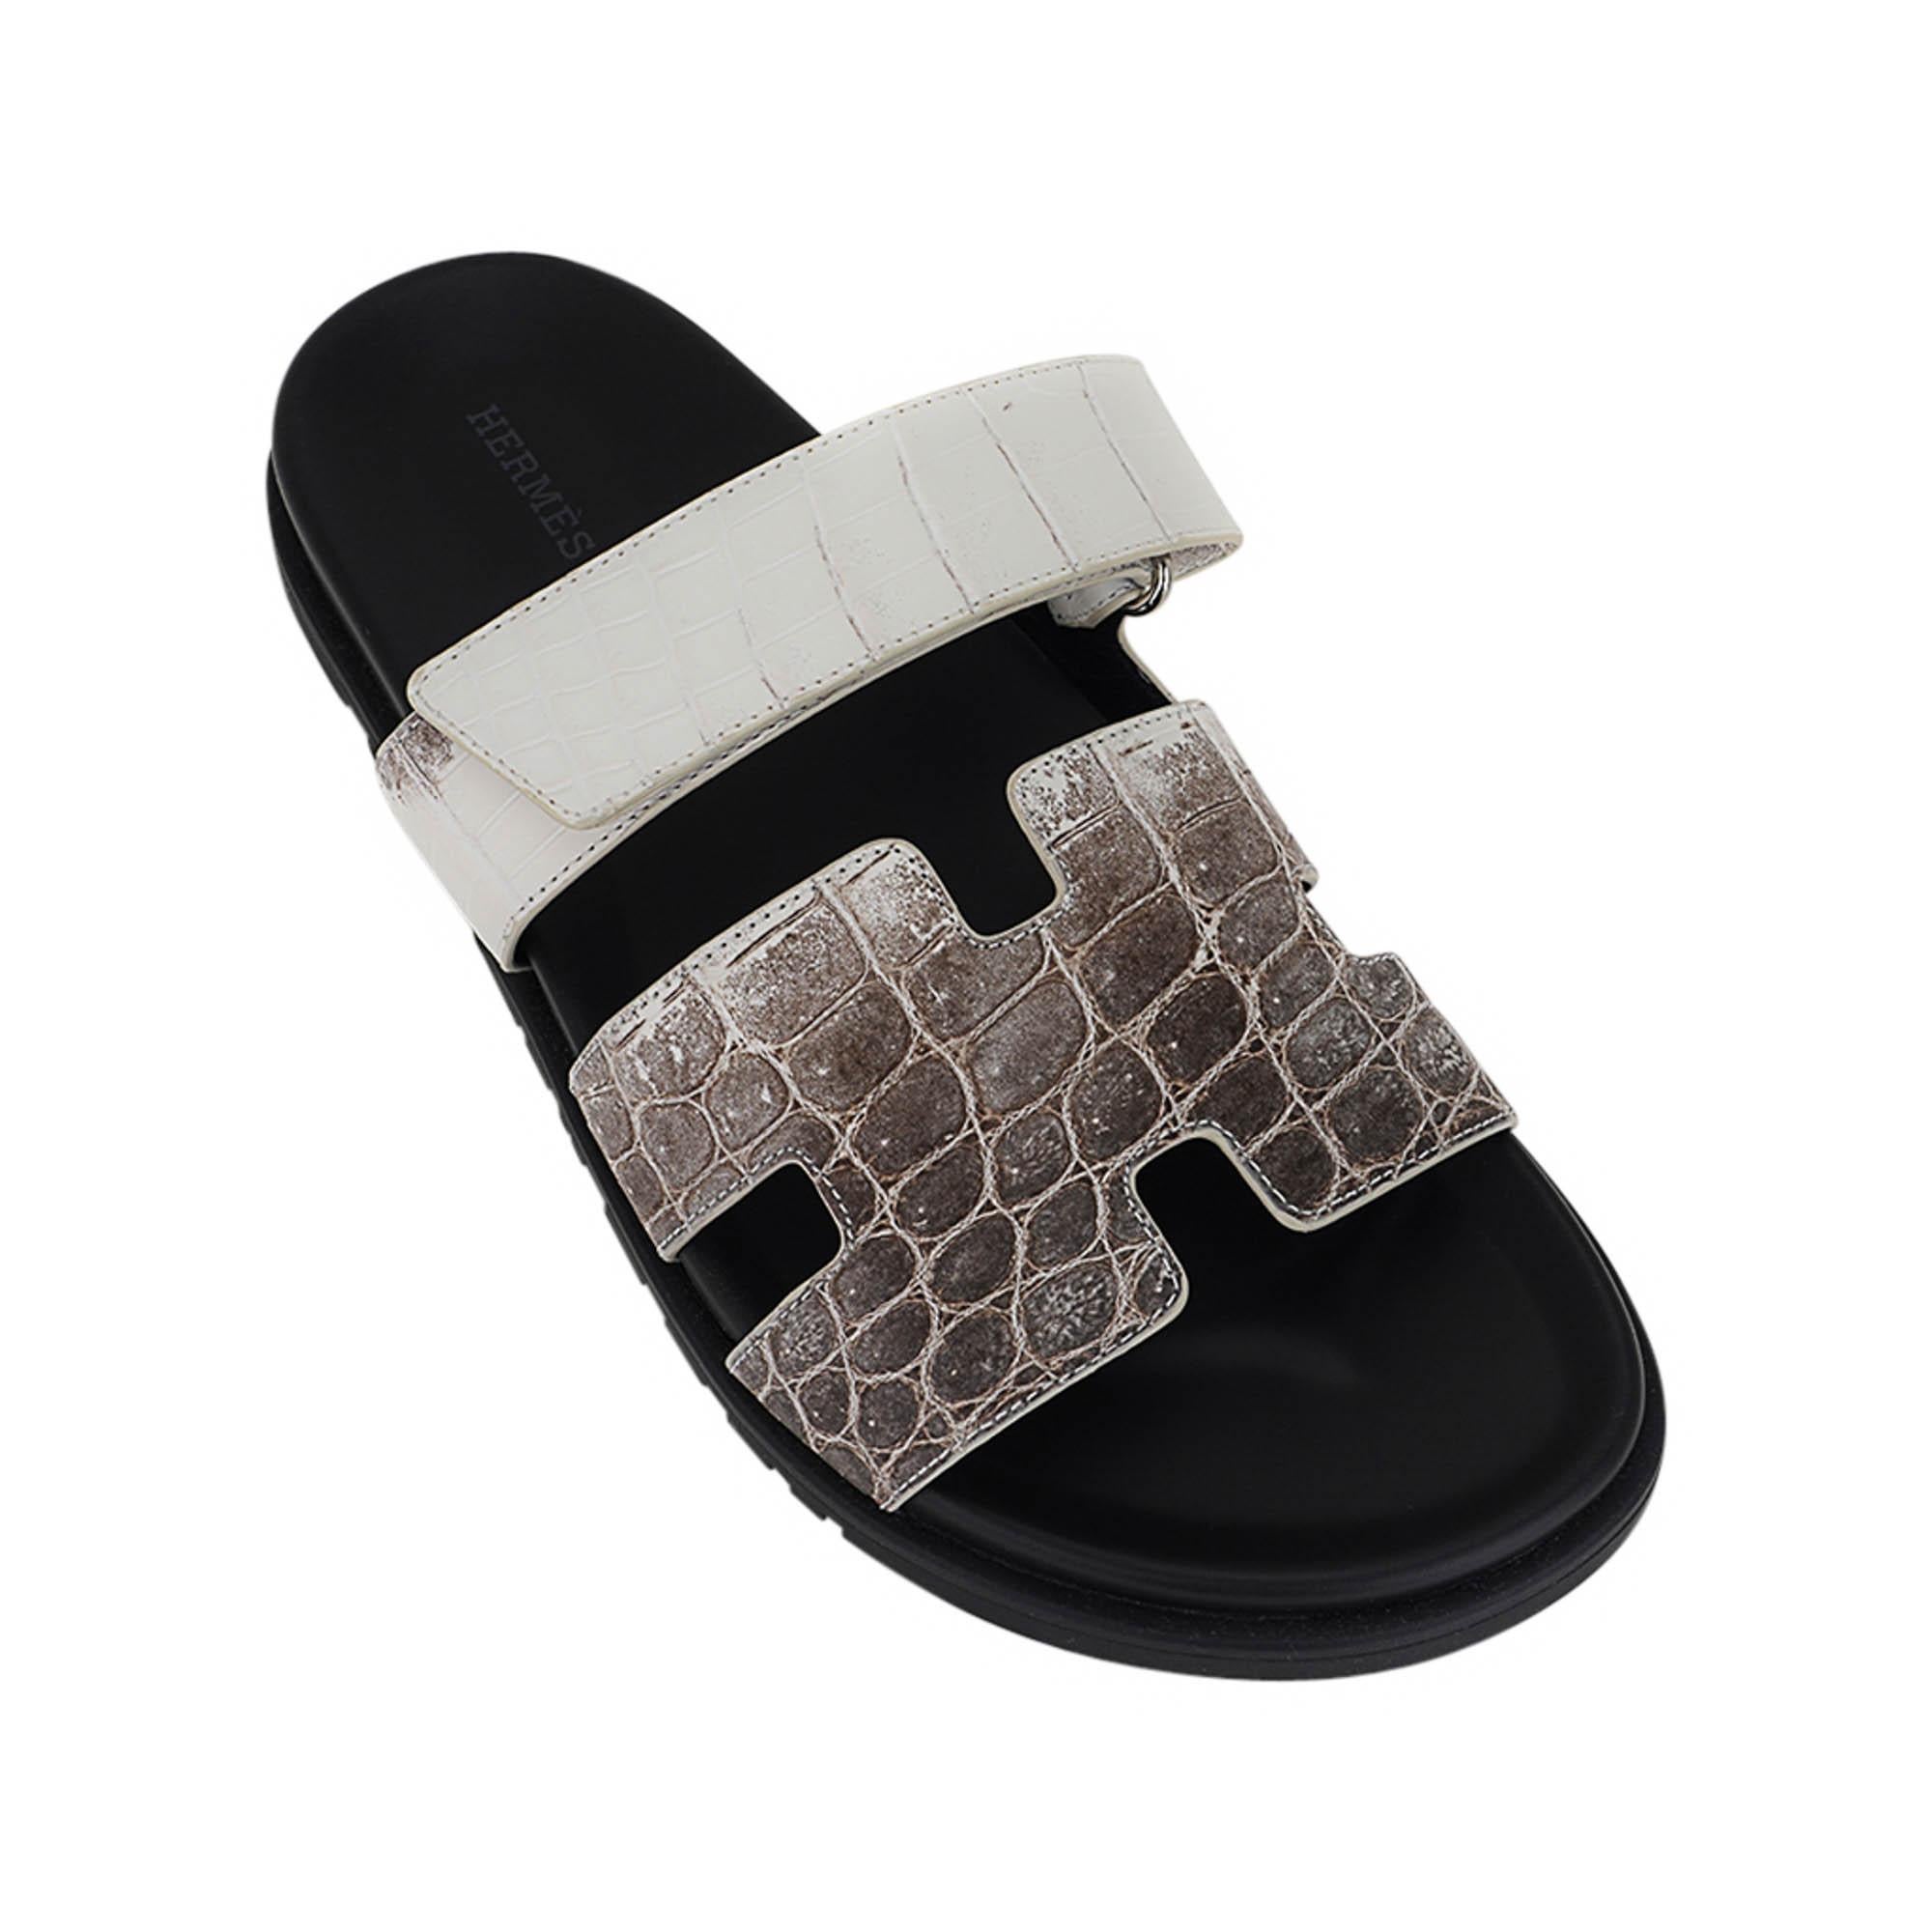 Hermes Chypre Himalaya Crocodile Limited Edition Men's Sandal 42 / 9 In New Condition For Sale In Miami, FL